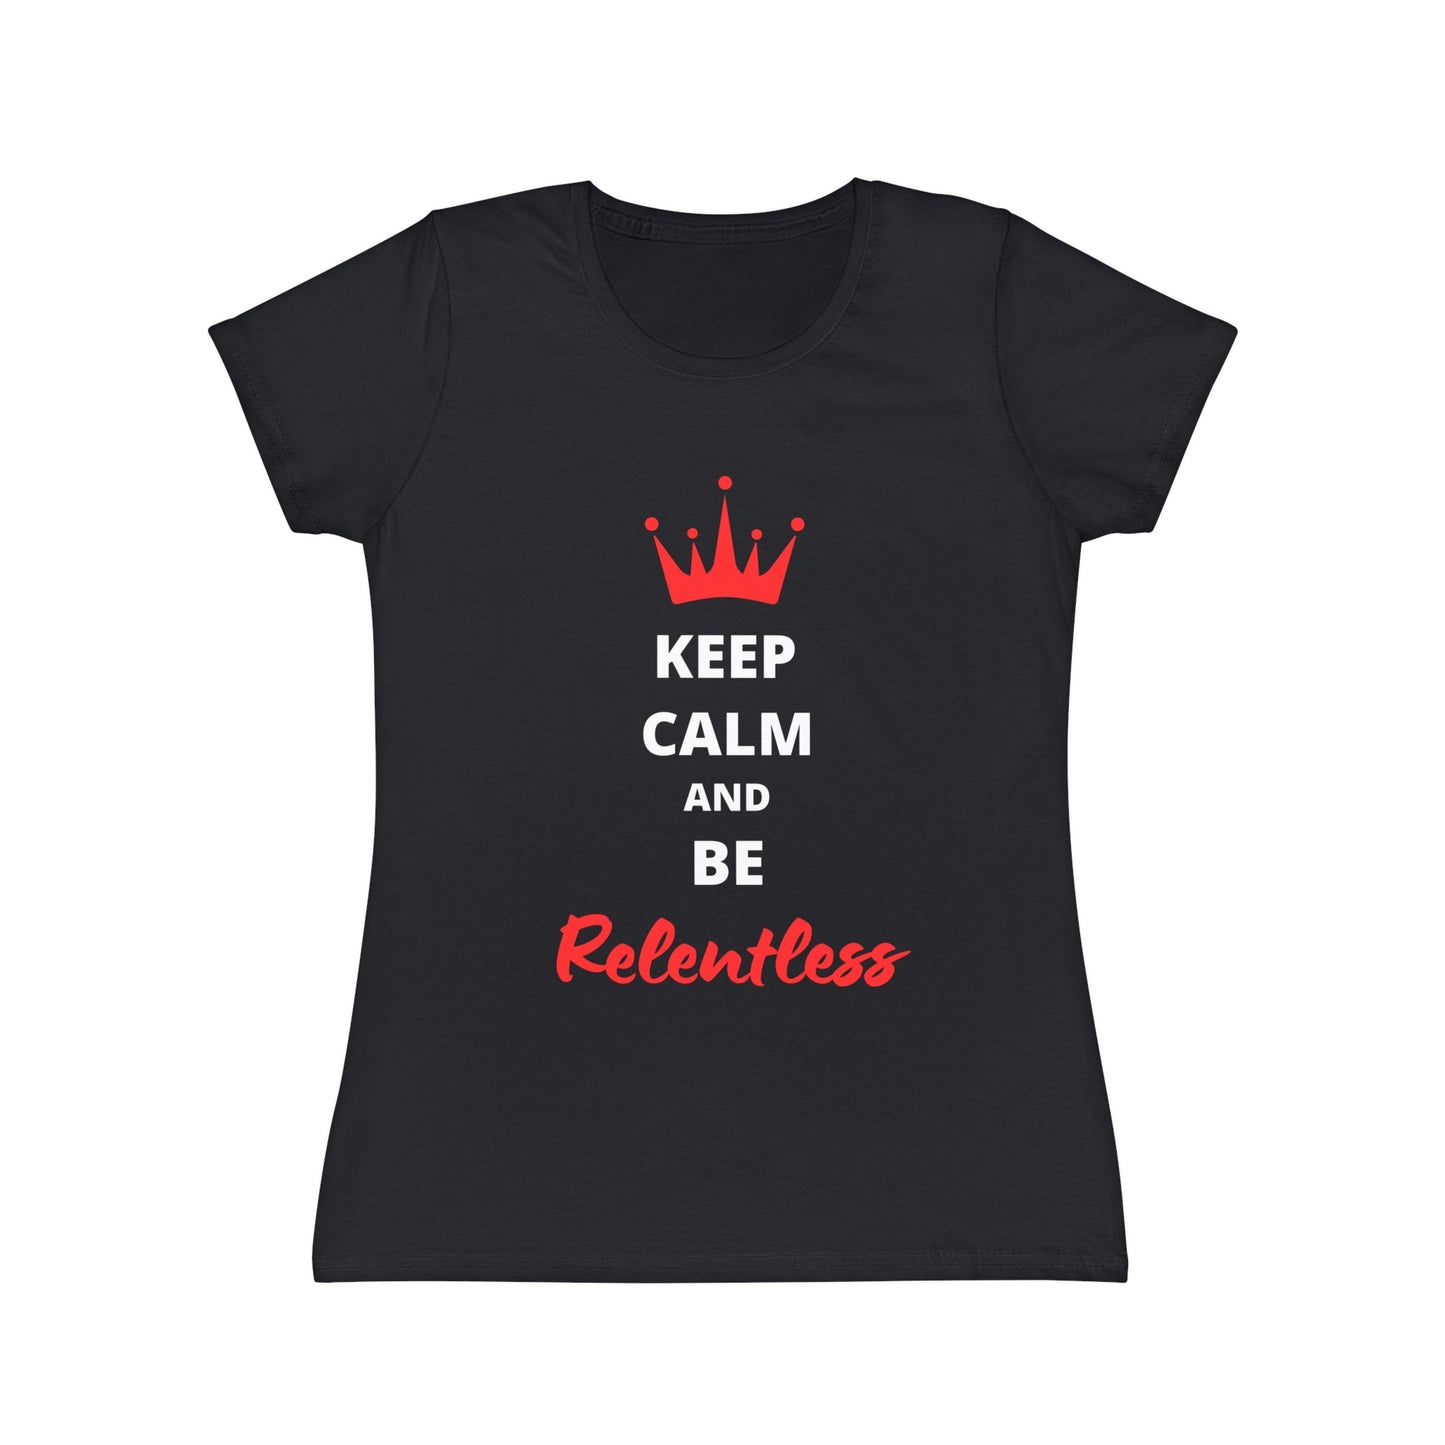 Women's Keep Calm and Be Relentless T-Shirt - white text